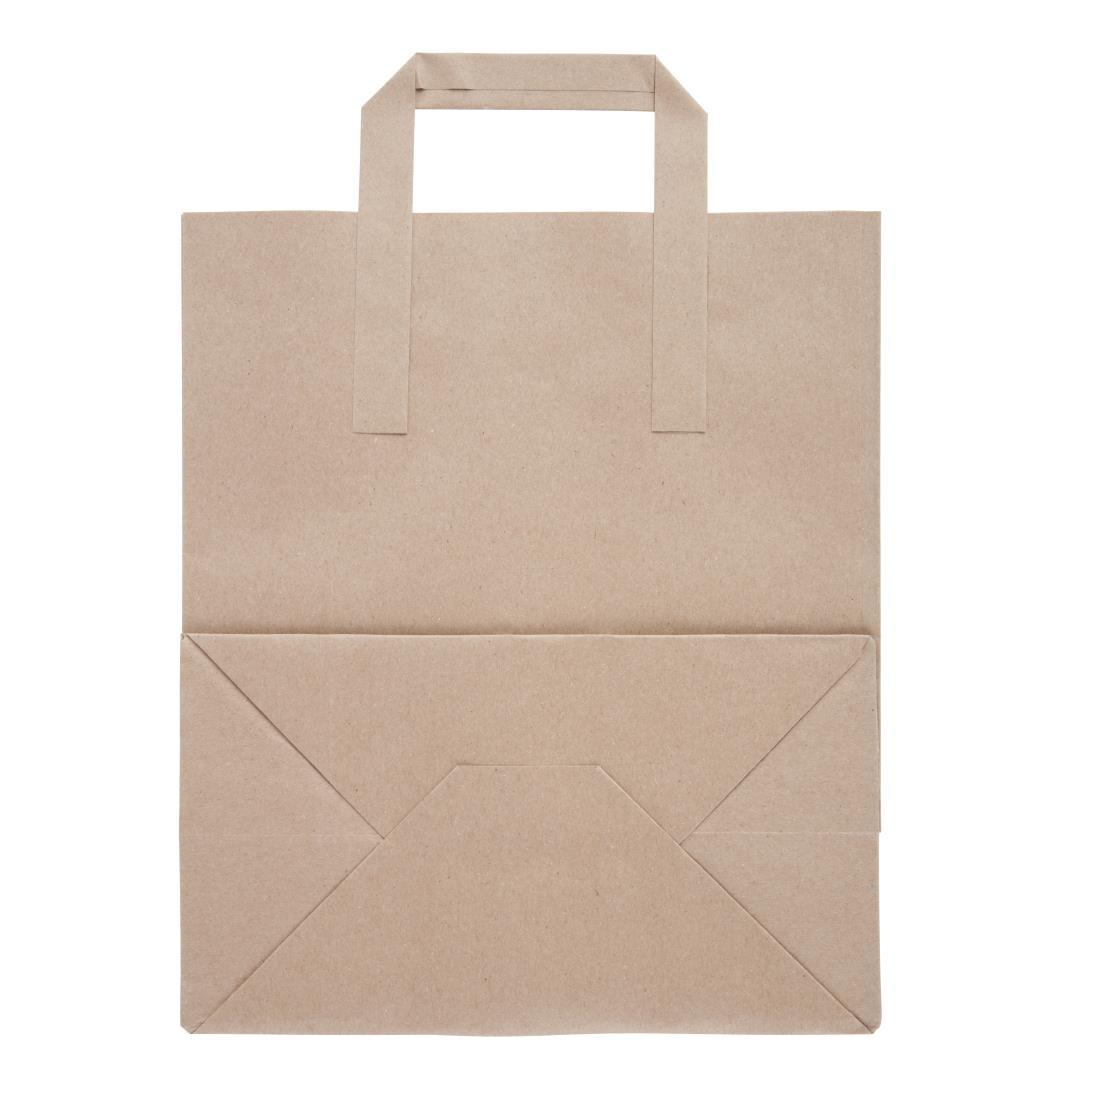 Fiesta Compostable Green Compostable Recycled Brown Paper Carrier Bags Large (Pack of 250) - CF592  - 8